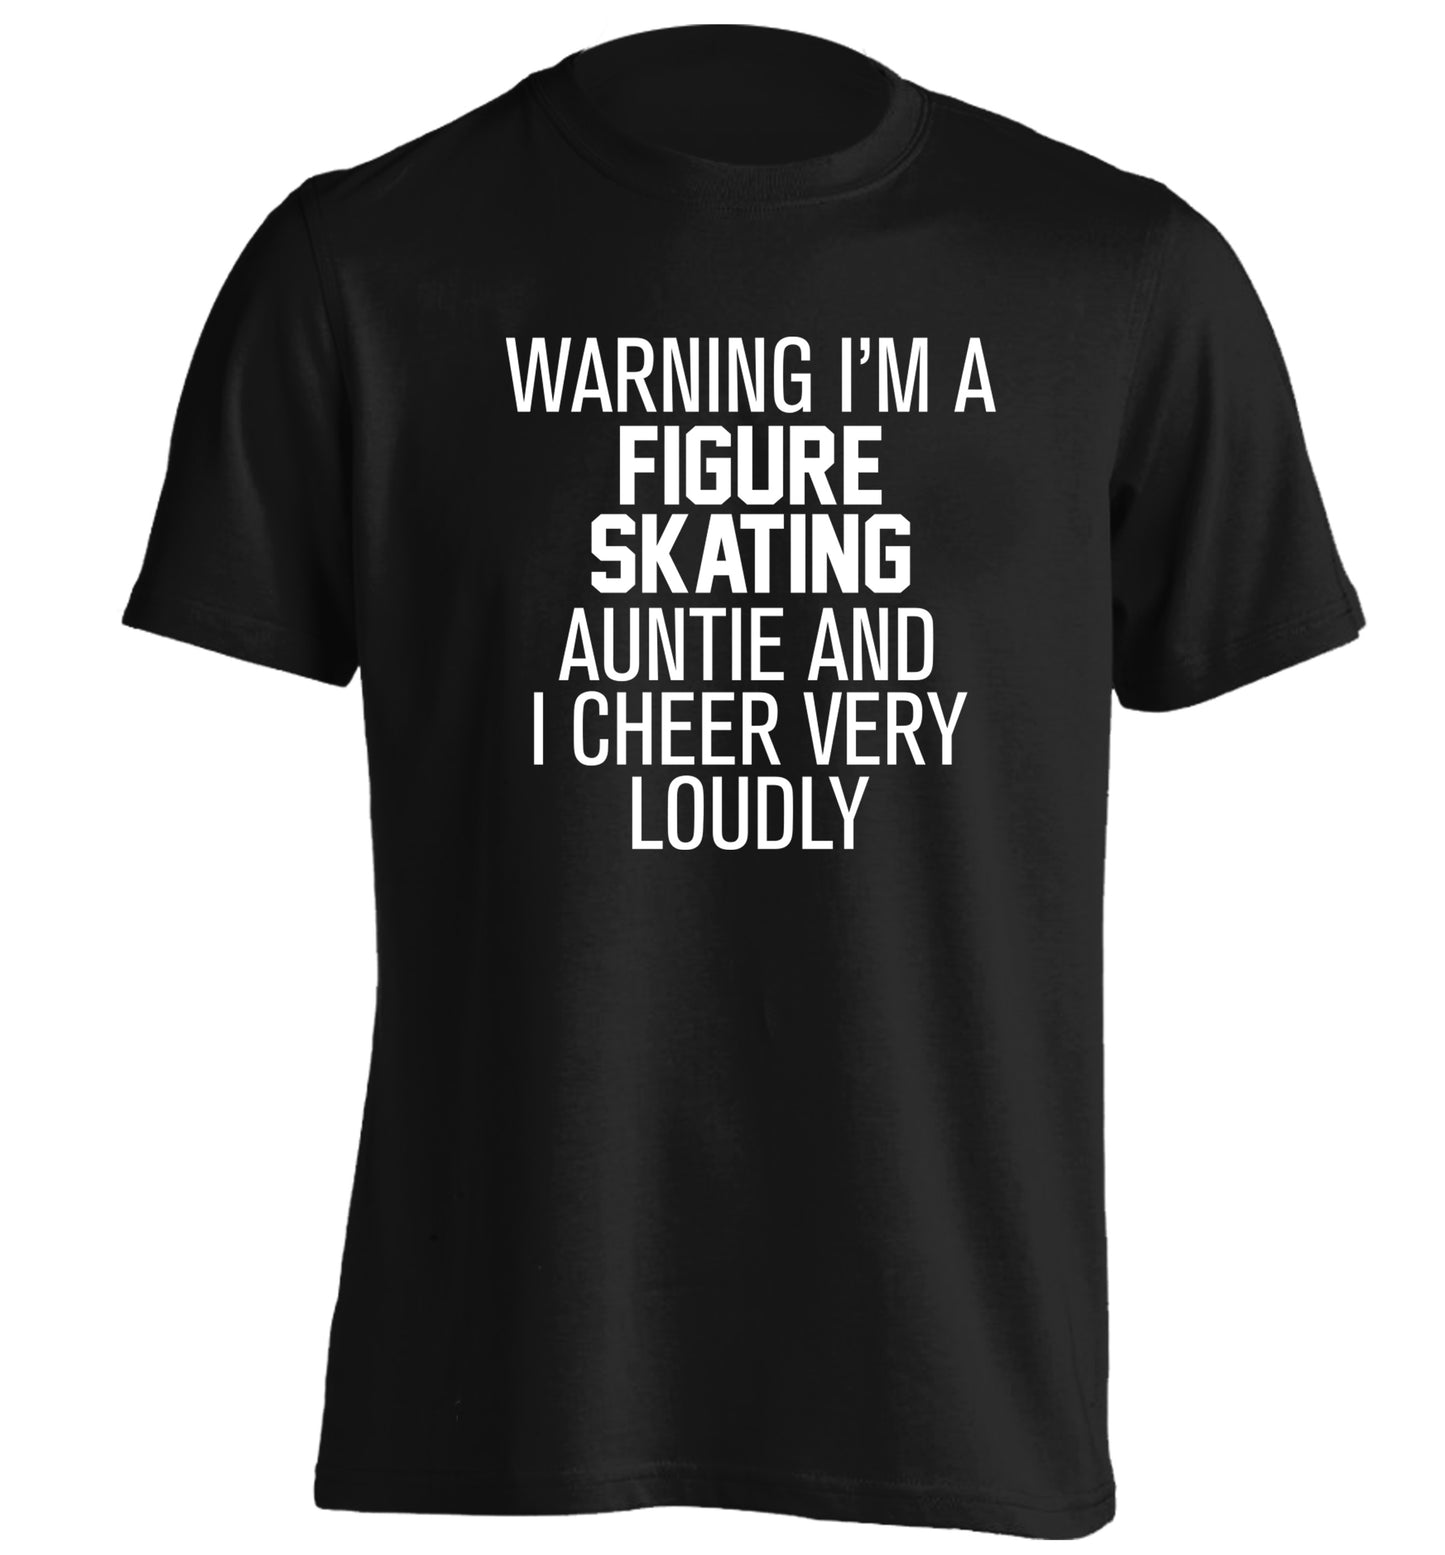 Warning I'm a figure skating auntie and I cheer very loudly adults unisexblack Tshirt 2XL